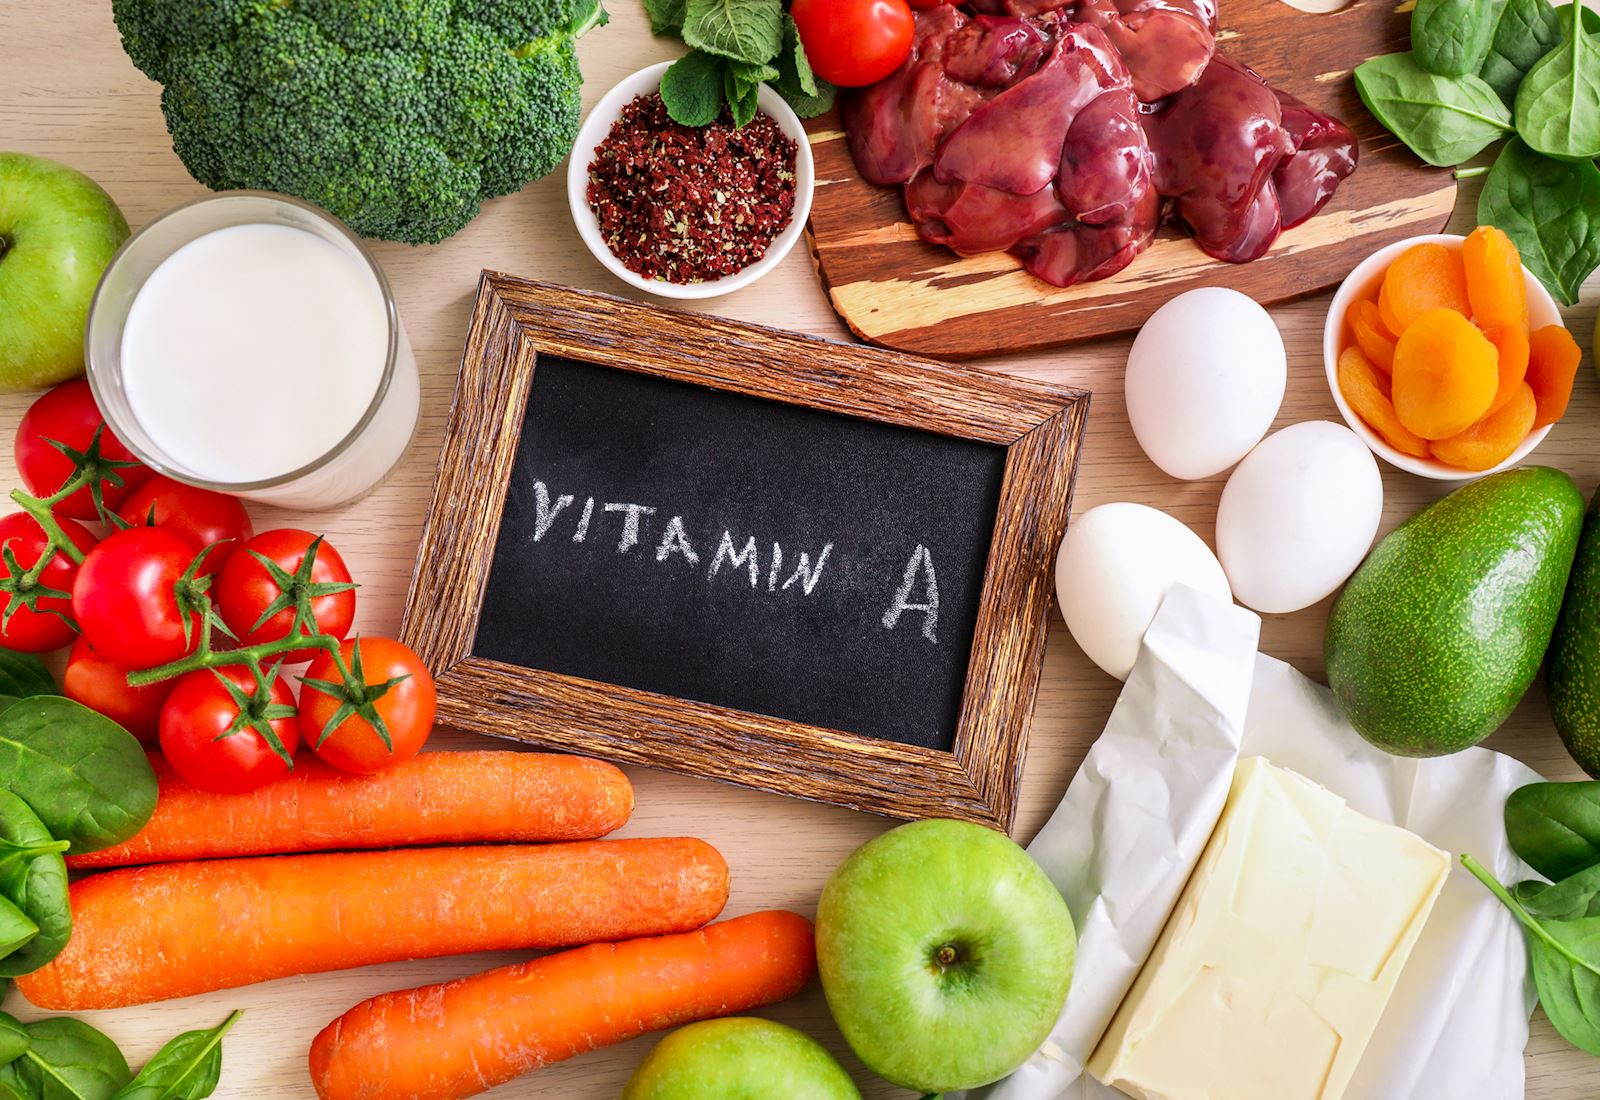 Vitamin A for better health